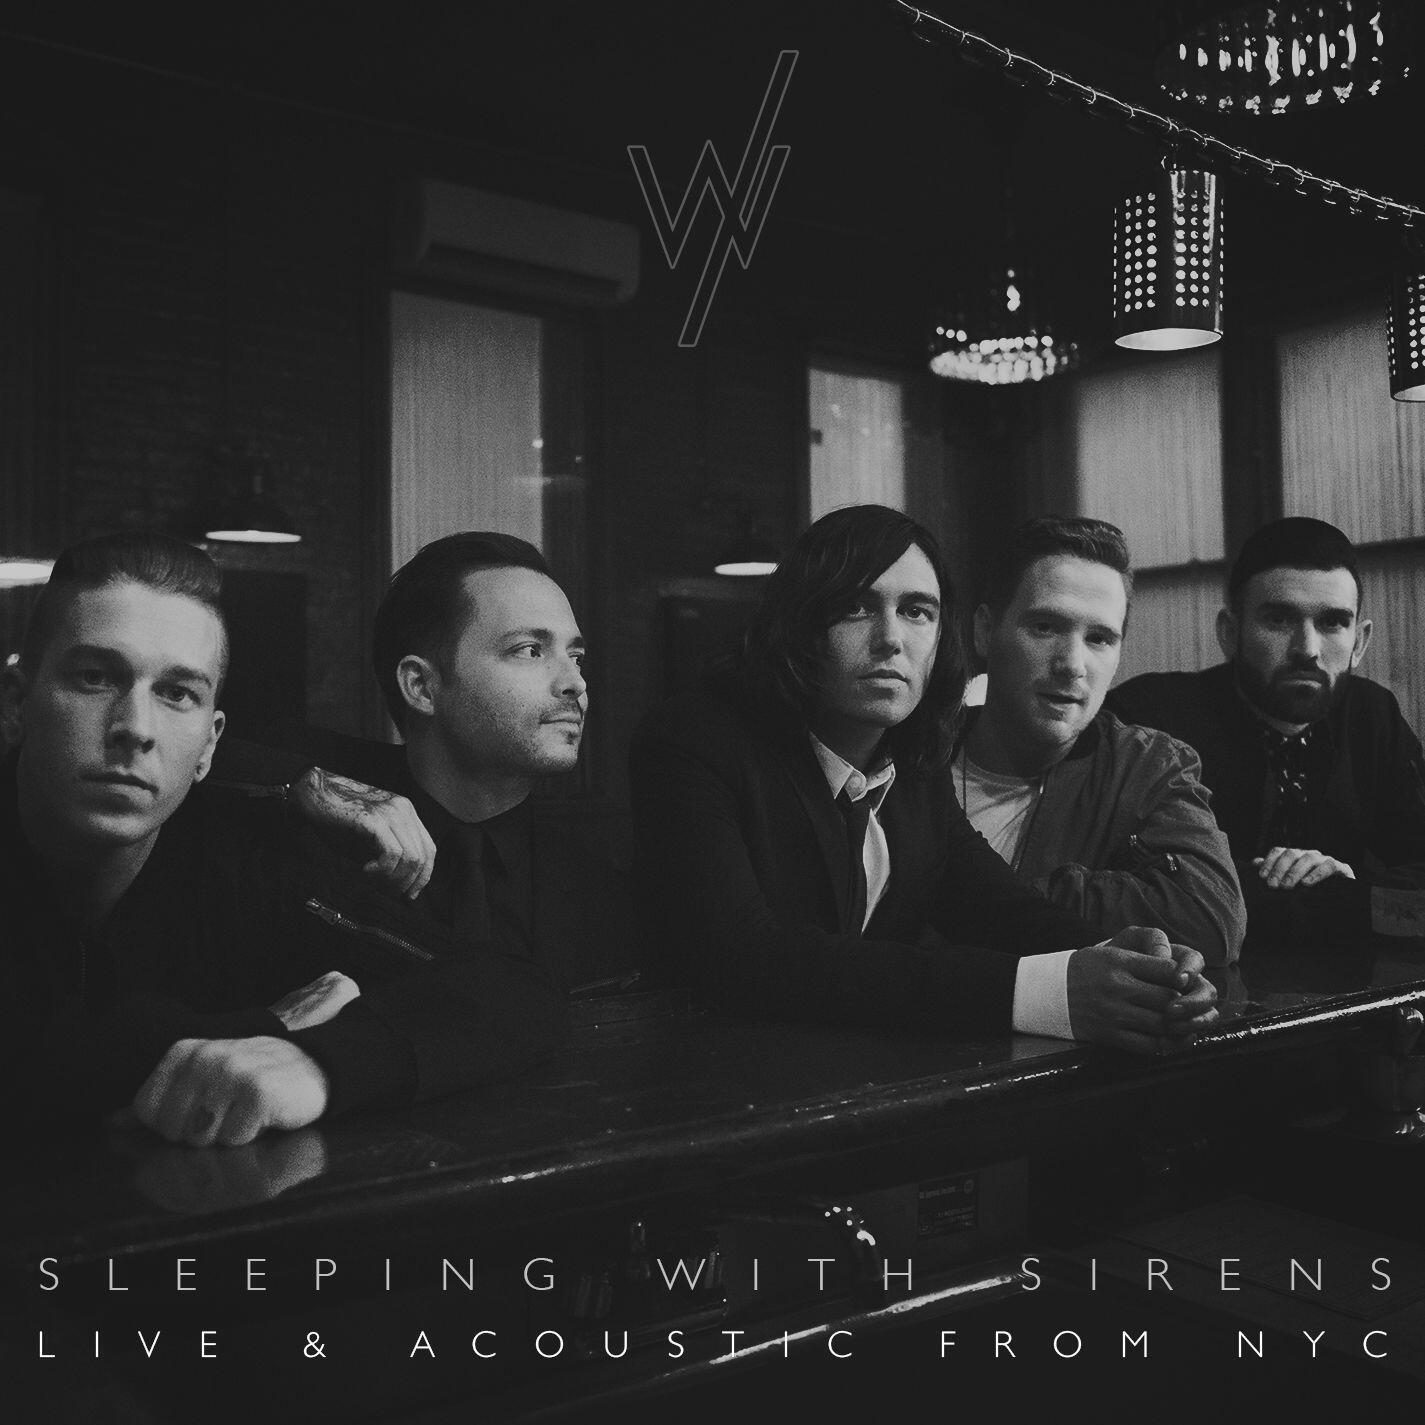 Sleeping with Sirens Live & Acoustic from NYC iHeart